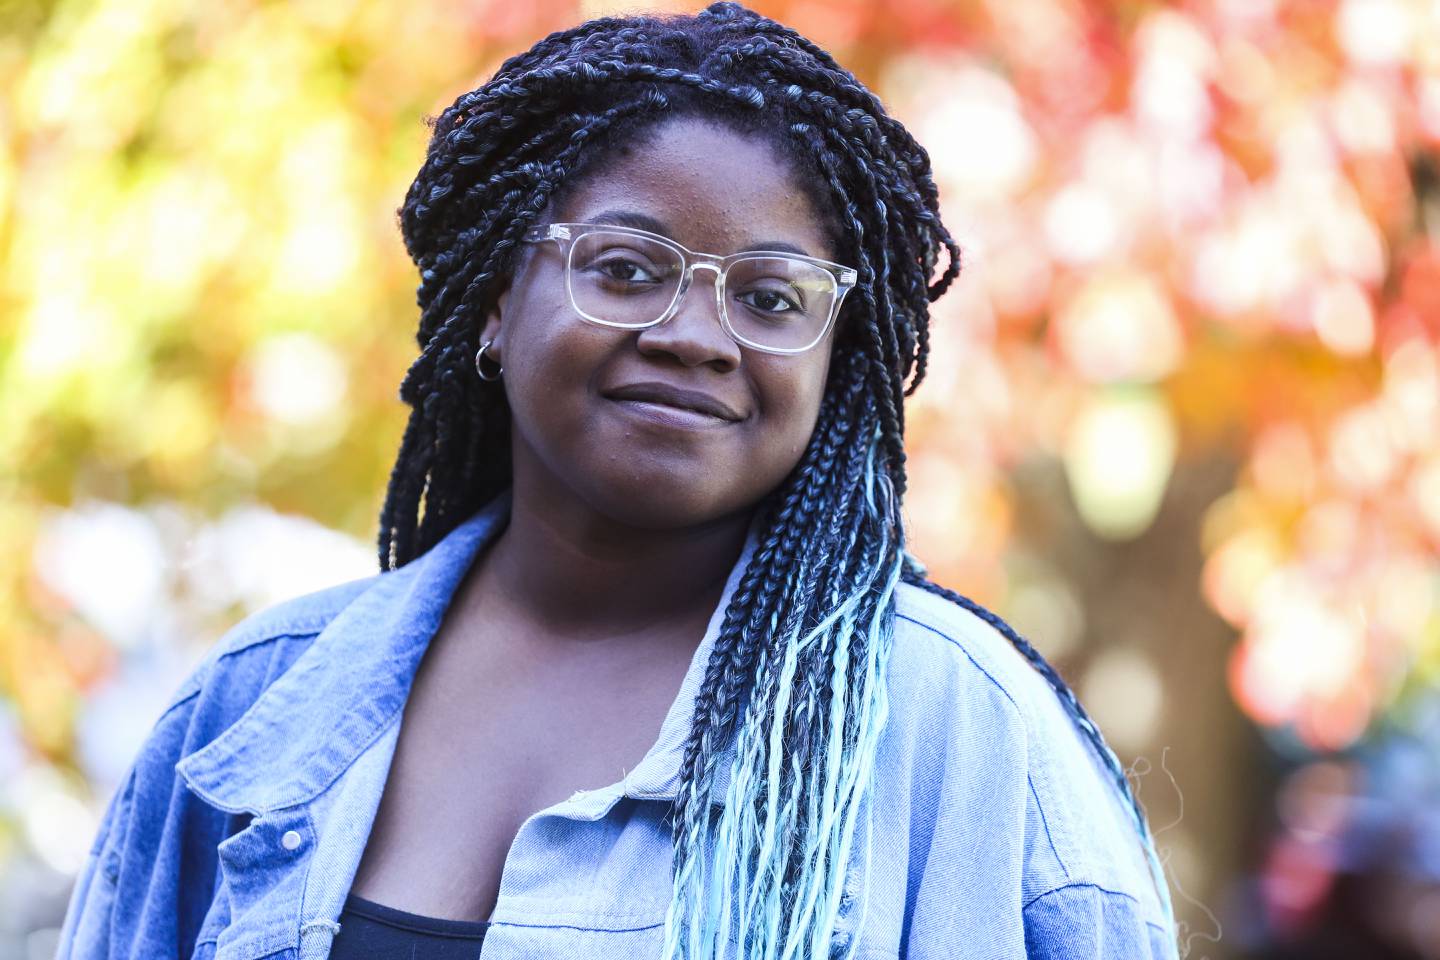 Ariana Williams is a participant in Baltimore’s guranteed income pilot program, which pays 200 young parents $1,000 per month in no-strings-attached financial support.